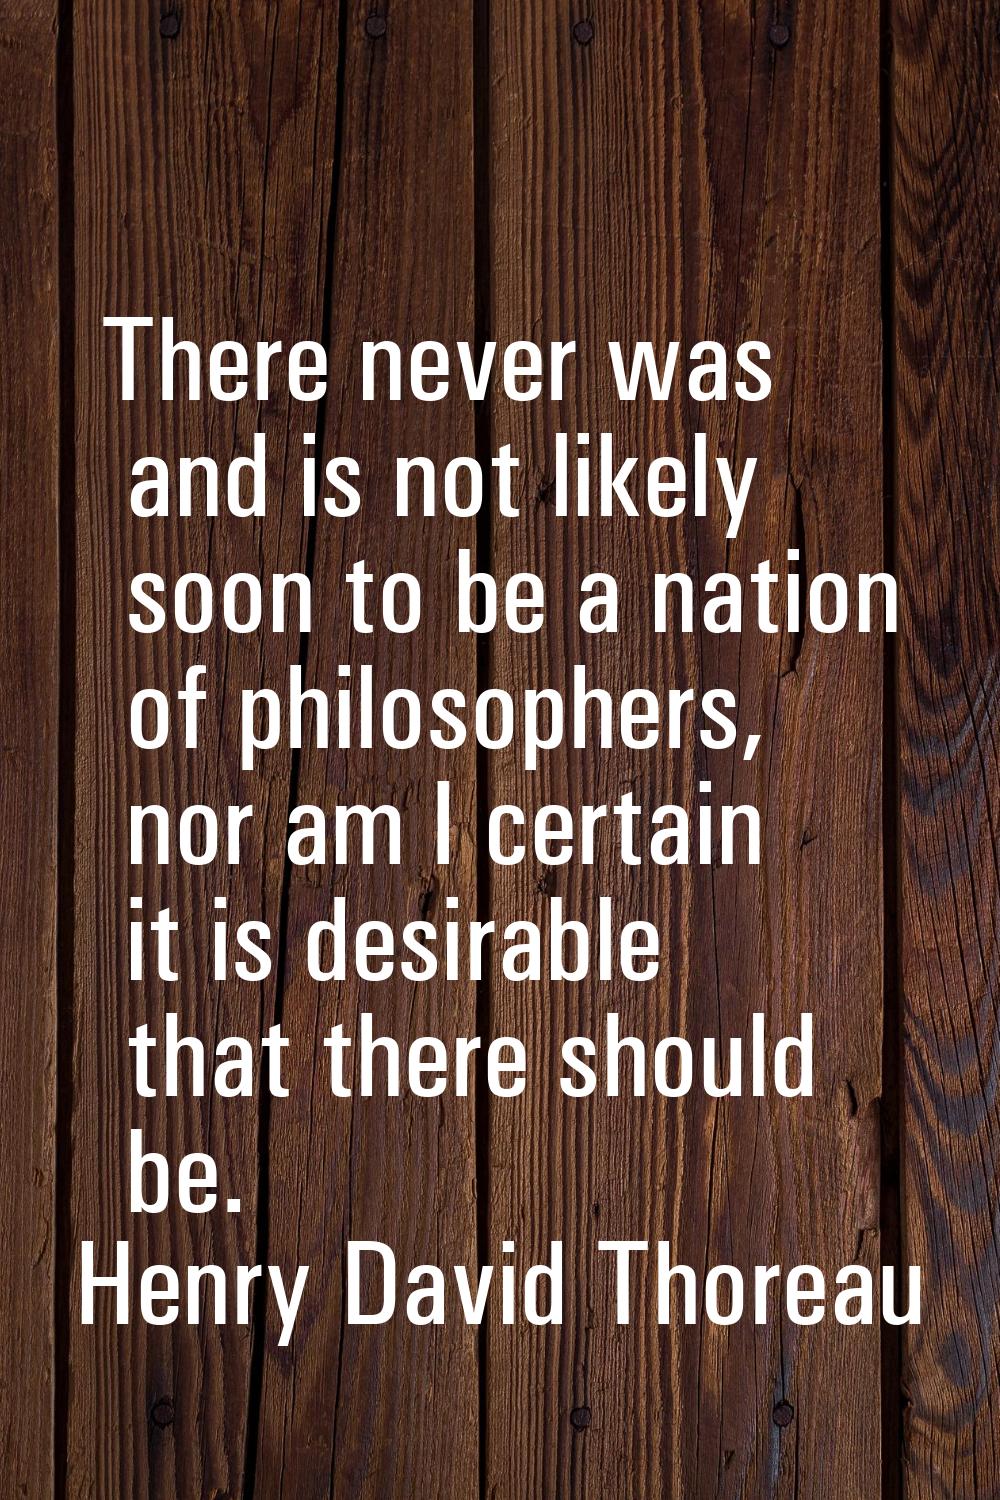 There never was and is not likely soon to be a nation of philosophers, nor am I certain it is desir